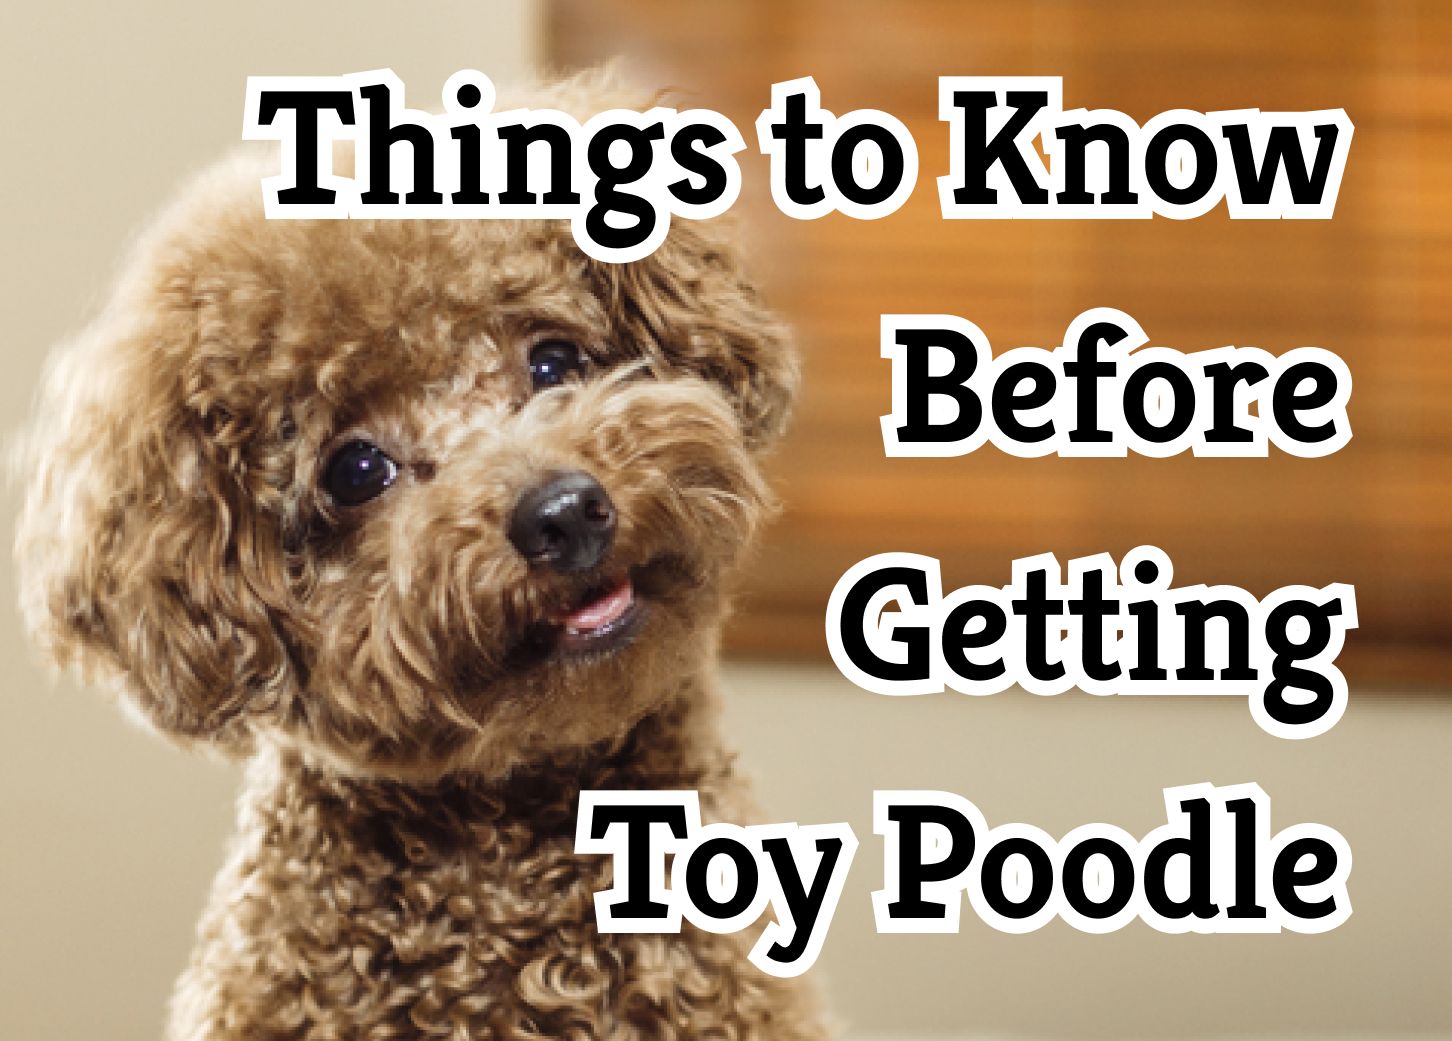 what is the smallest poodle toy or teacup